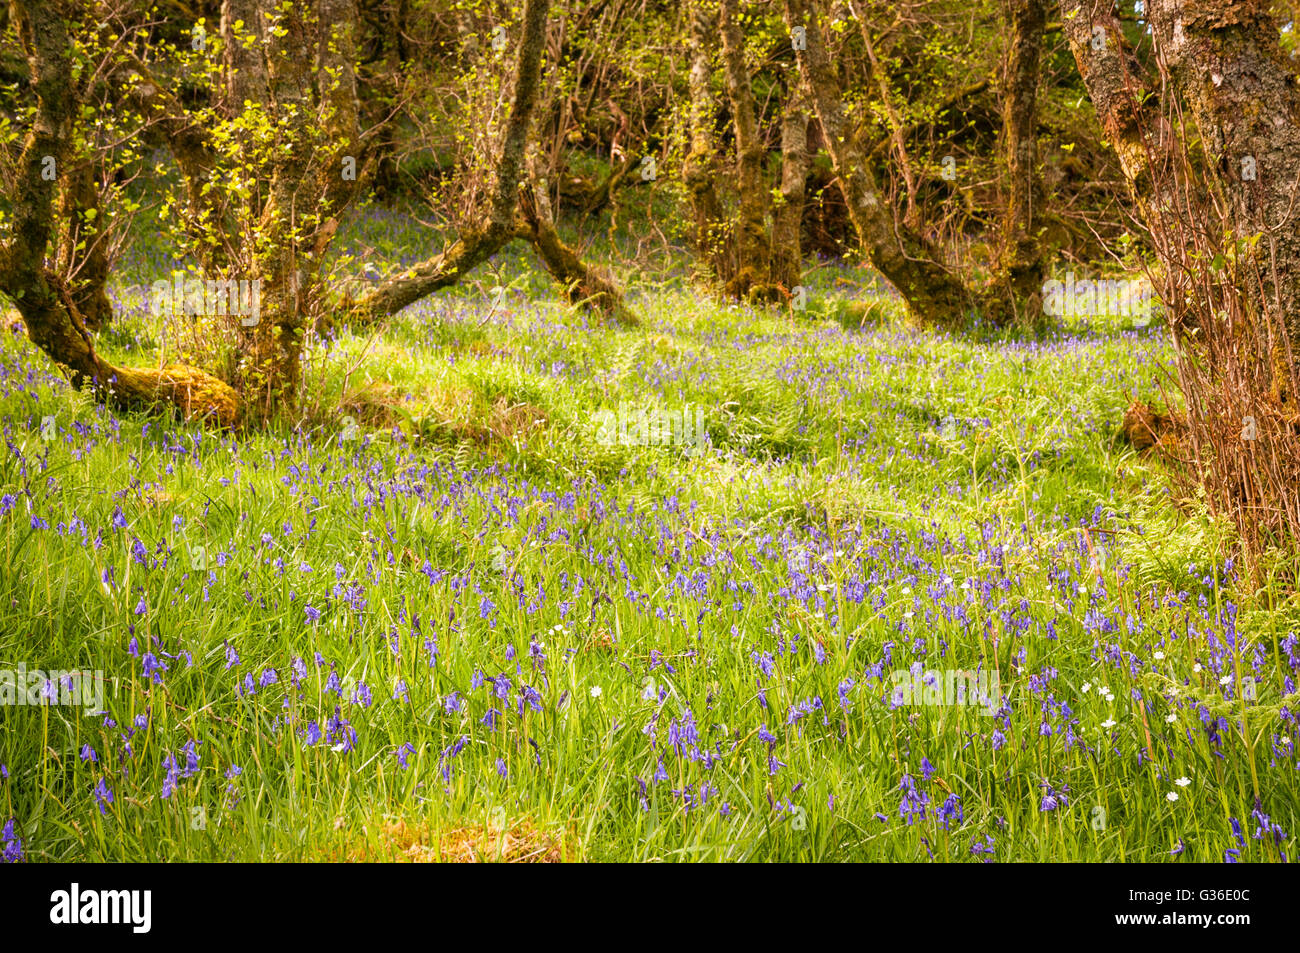 A beautiful patch of Bluebells, Hyacinthoides non-scripts, with dappled light on the floor of a Scottish Highland woodland. Stock Photo